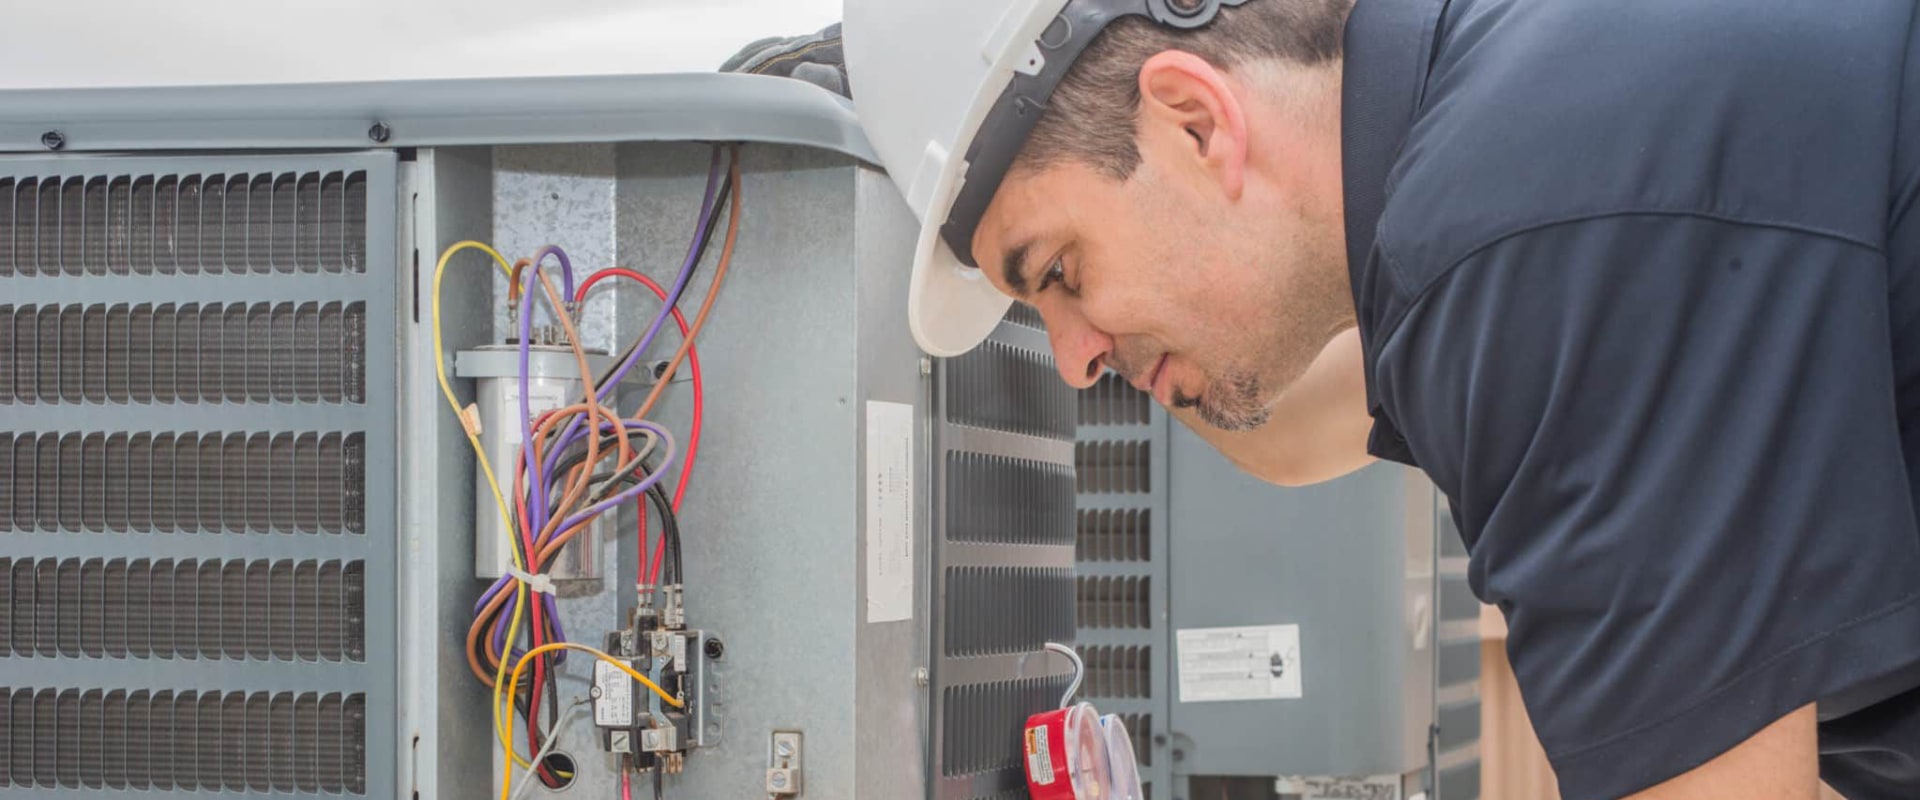 What Warranties are Available for HVAC Systems in Broward County, FL?